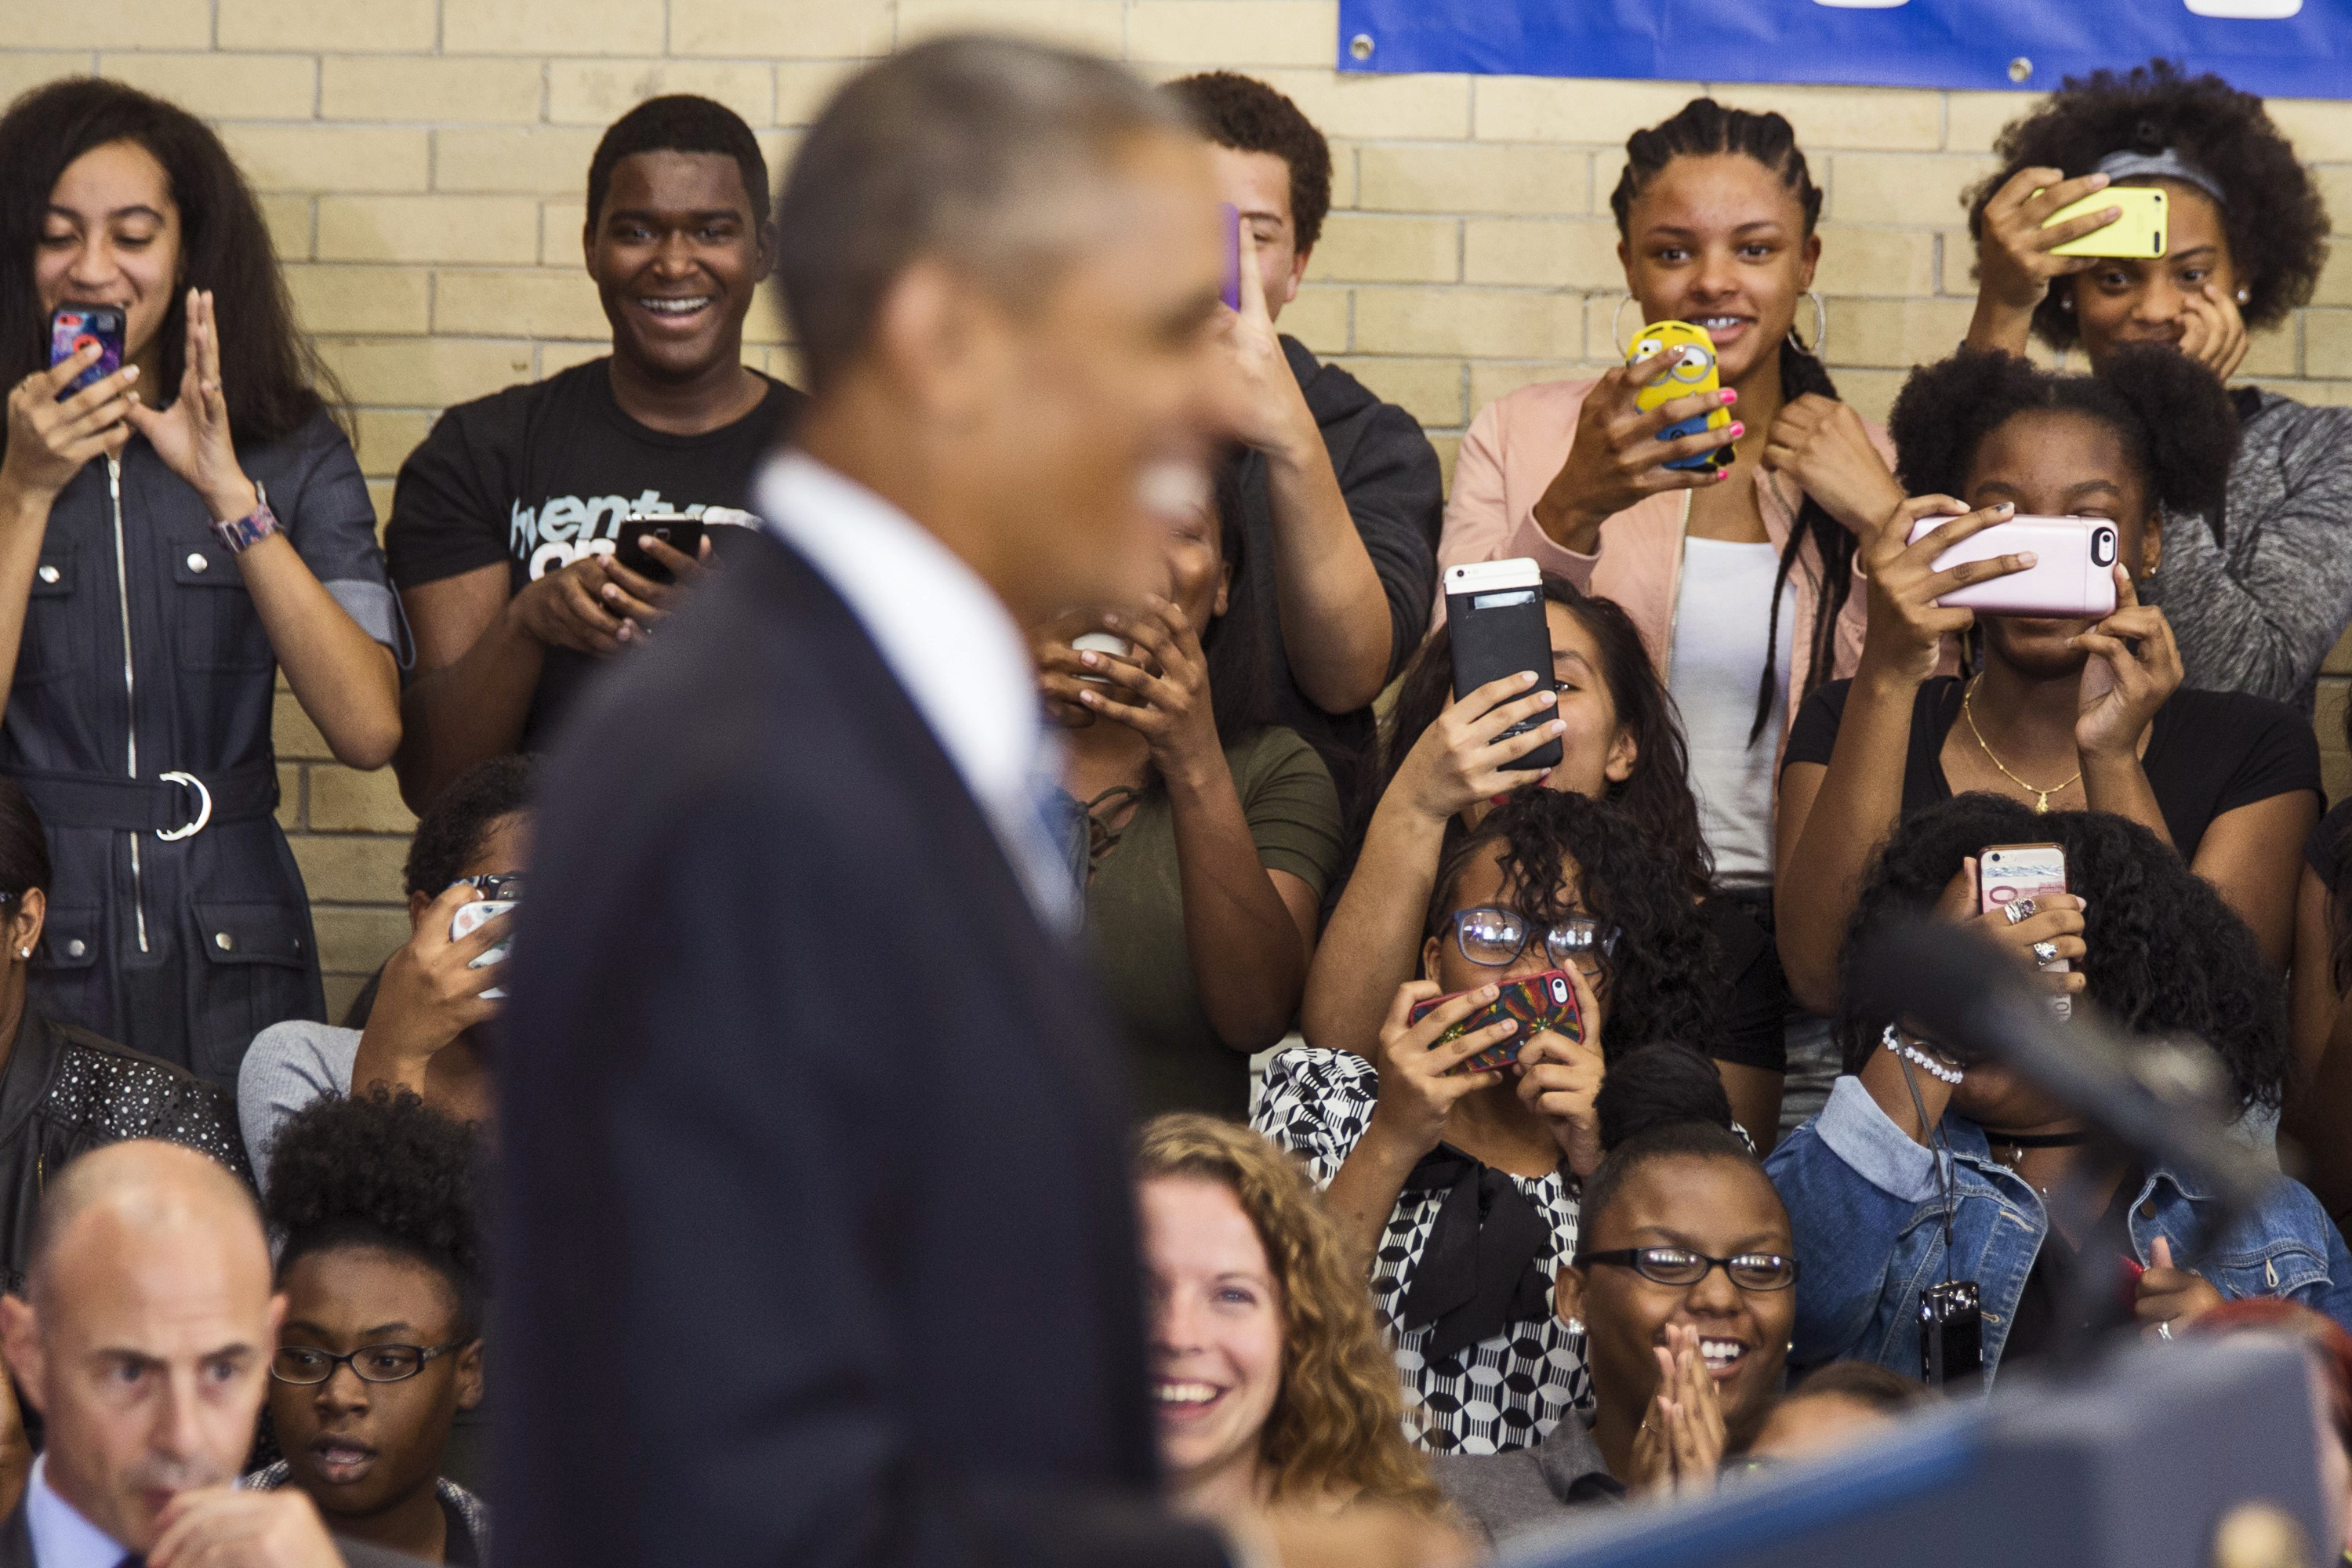 Obama smiles as students take photos on their cell phones during a speech at Benjamin Banneker Academy High School in Washington, on Oct. 17, 2016. (Anadolu Agency—Getty Images)